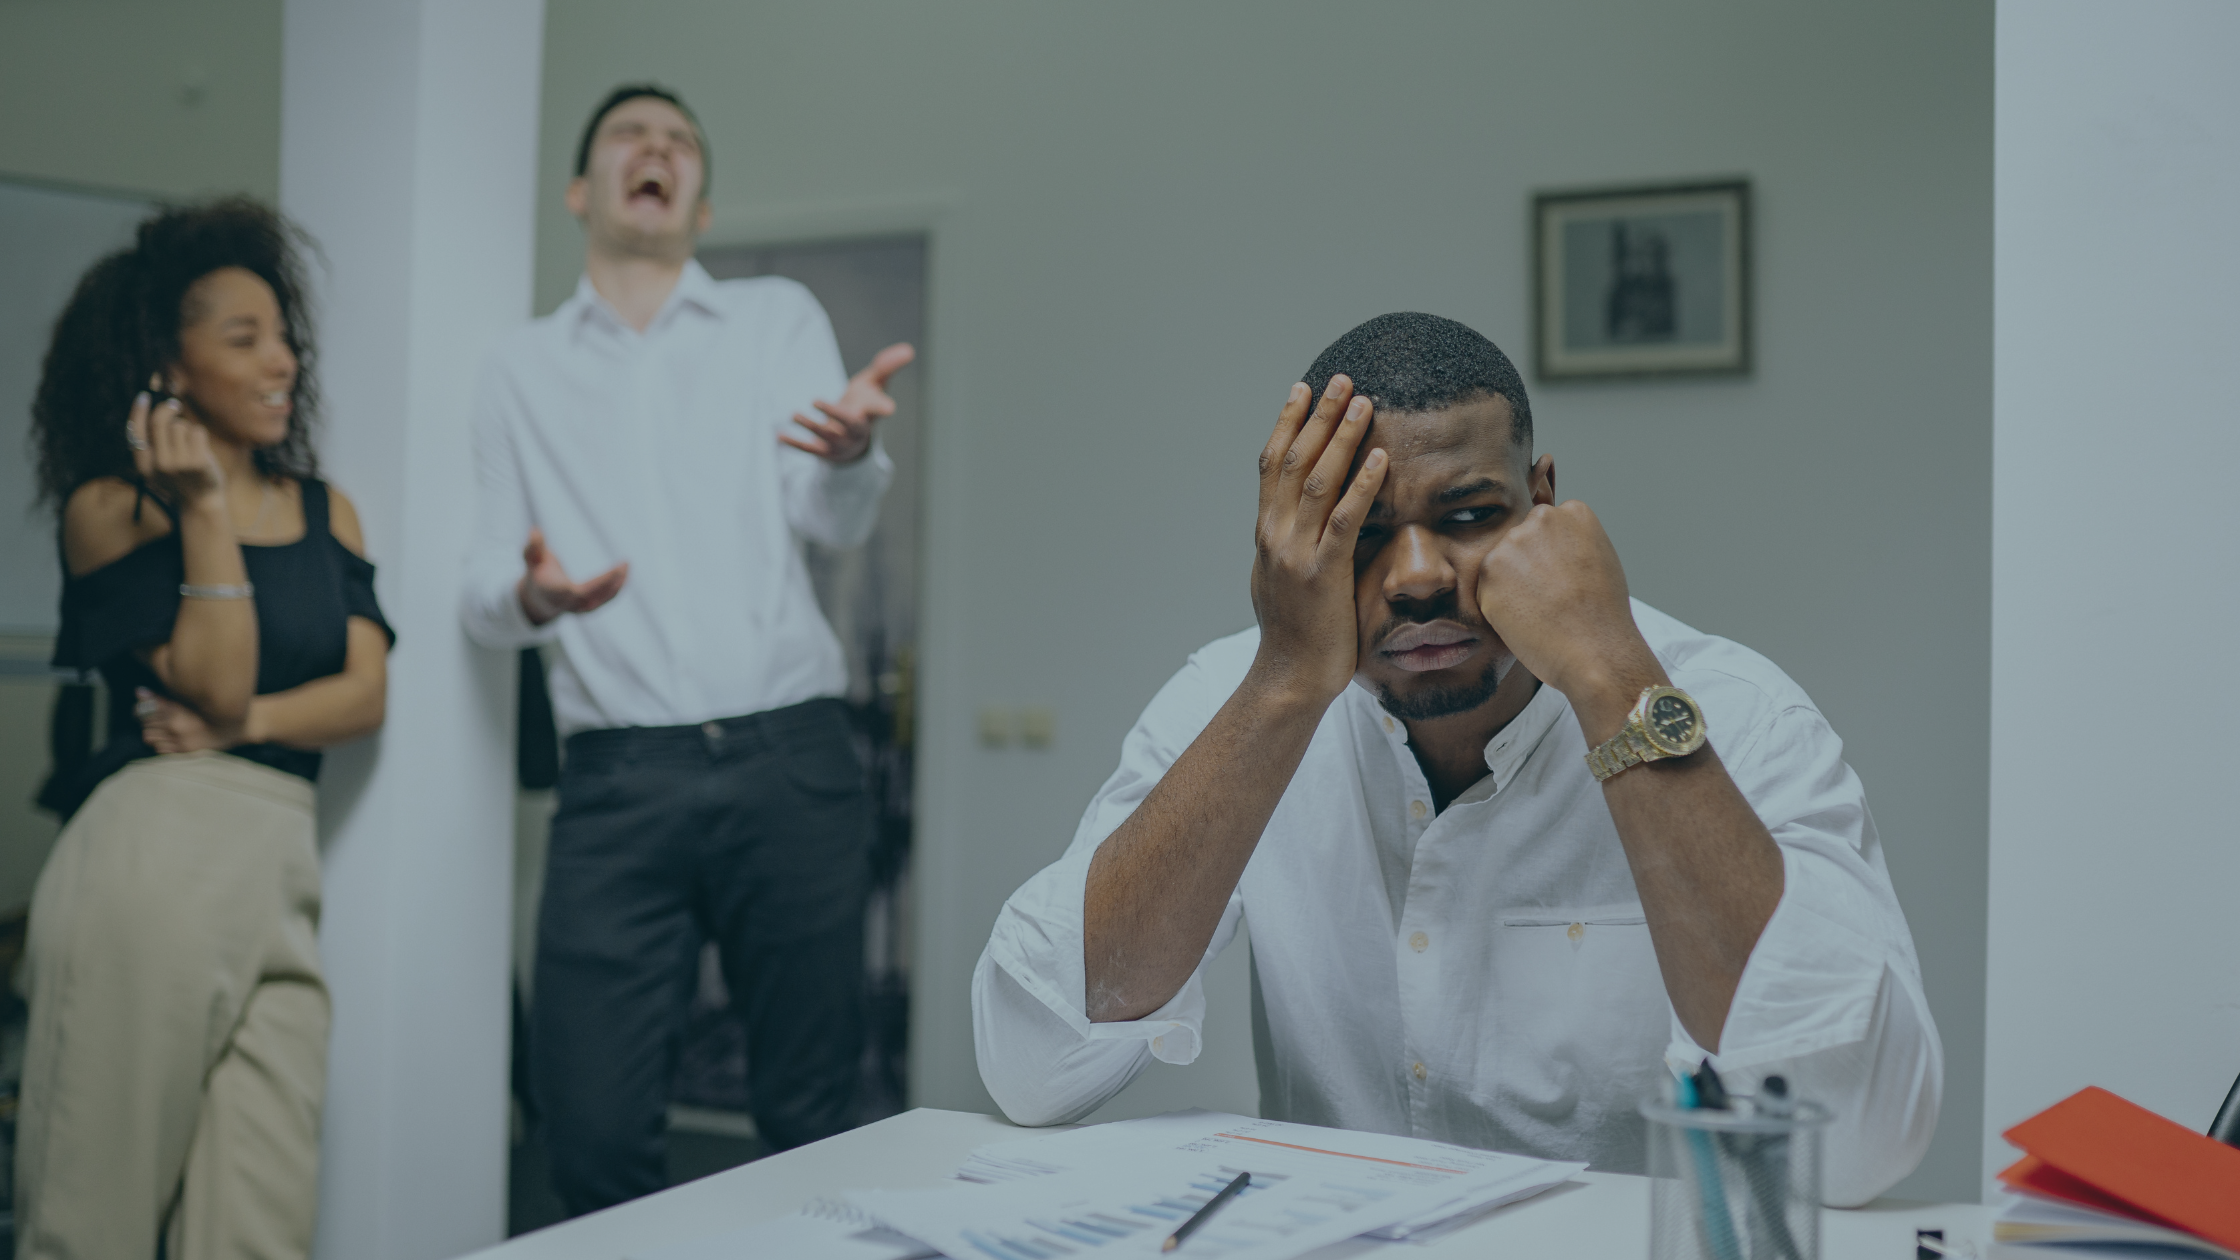 Workplace Banter V Bullying: Employers must know the difference!